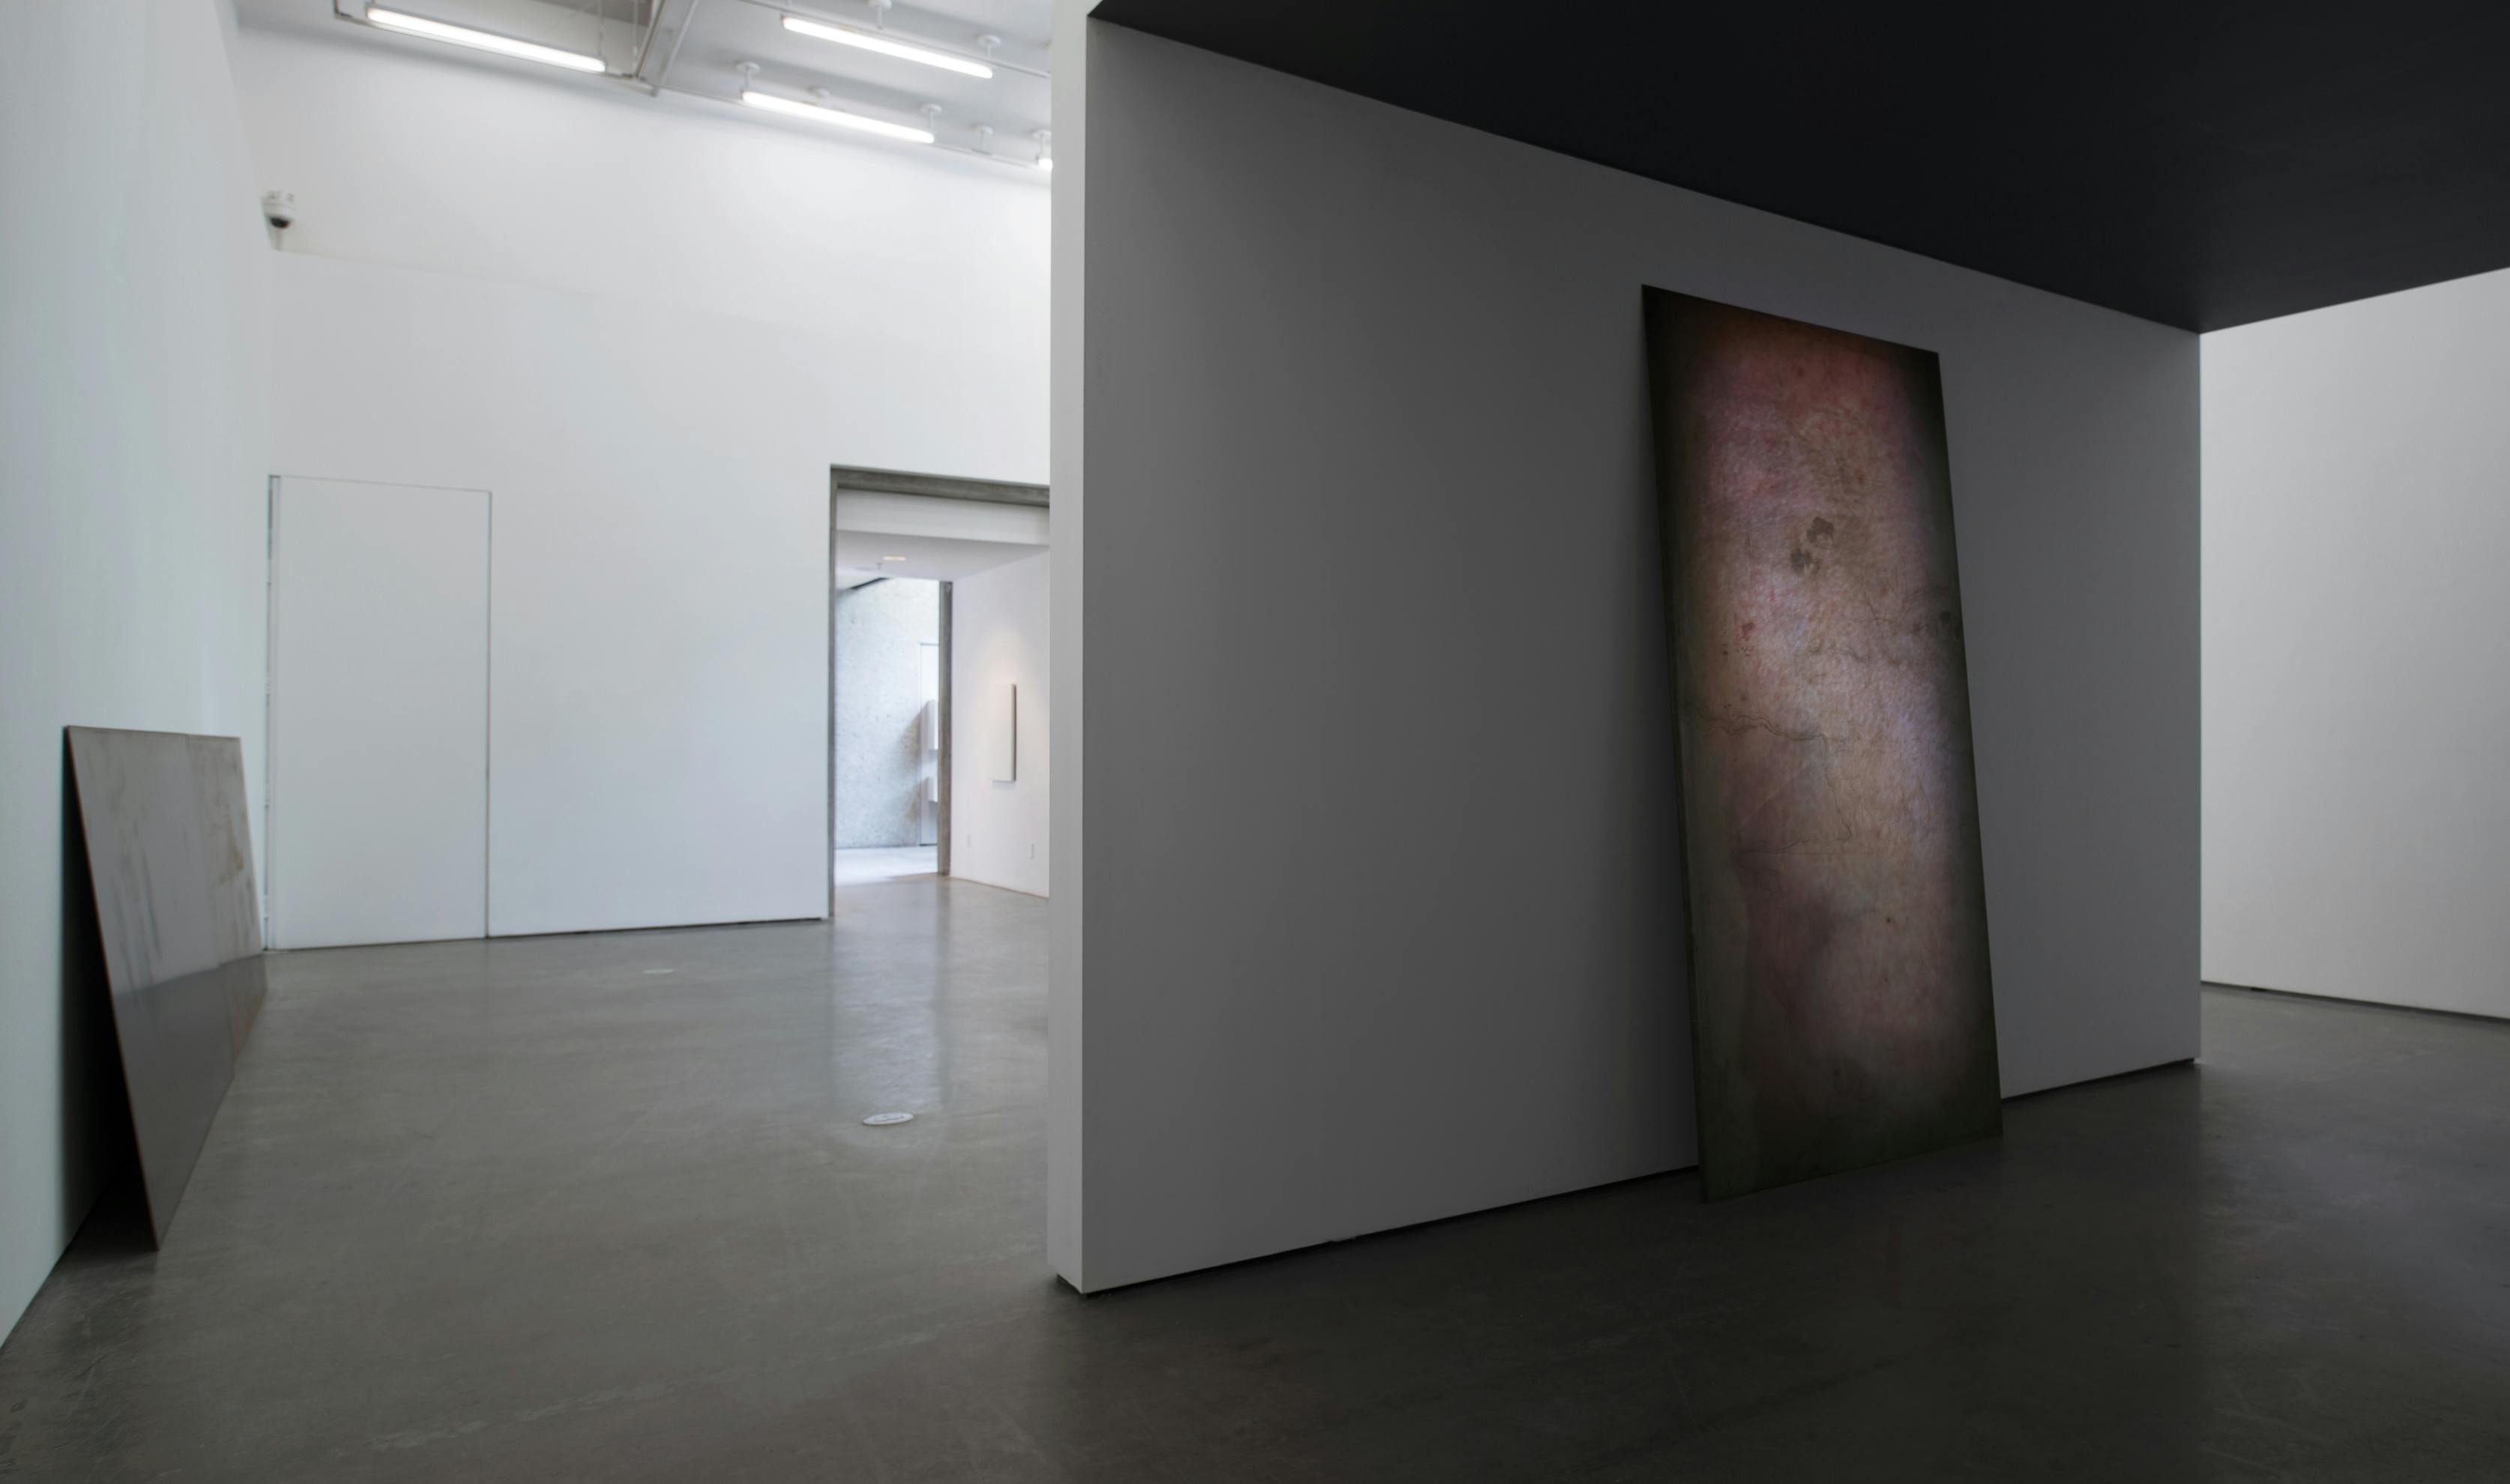 At the center of a gallery space, one large steel sheet leans against the back of a freestanding wall. A low ceiling darkens the space around the sheet and wall. 